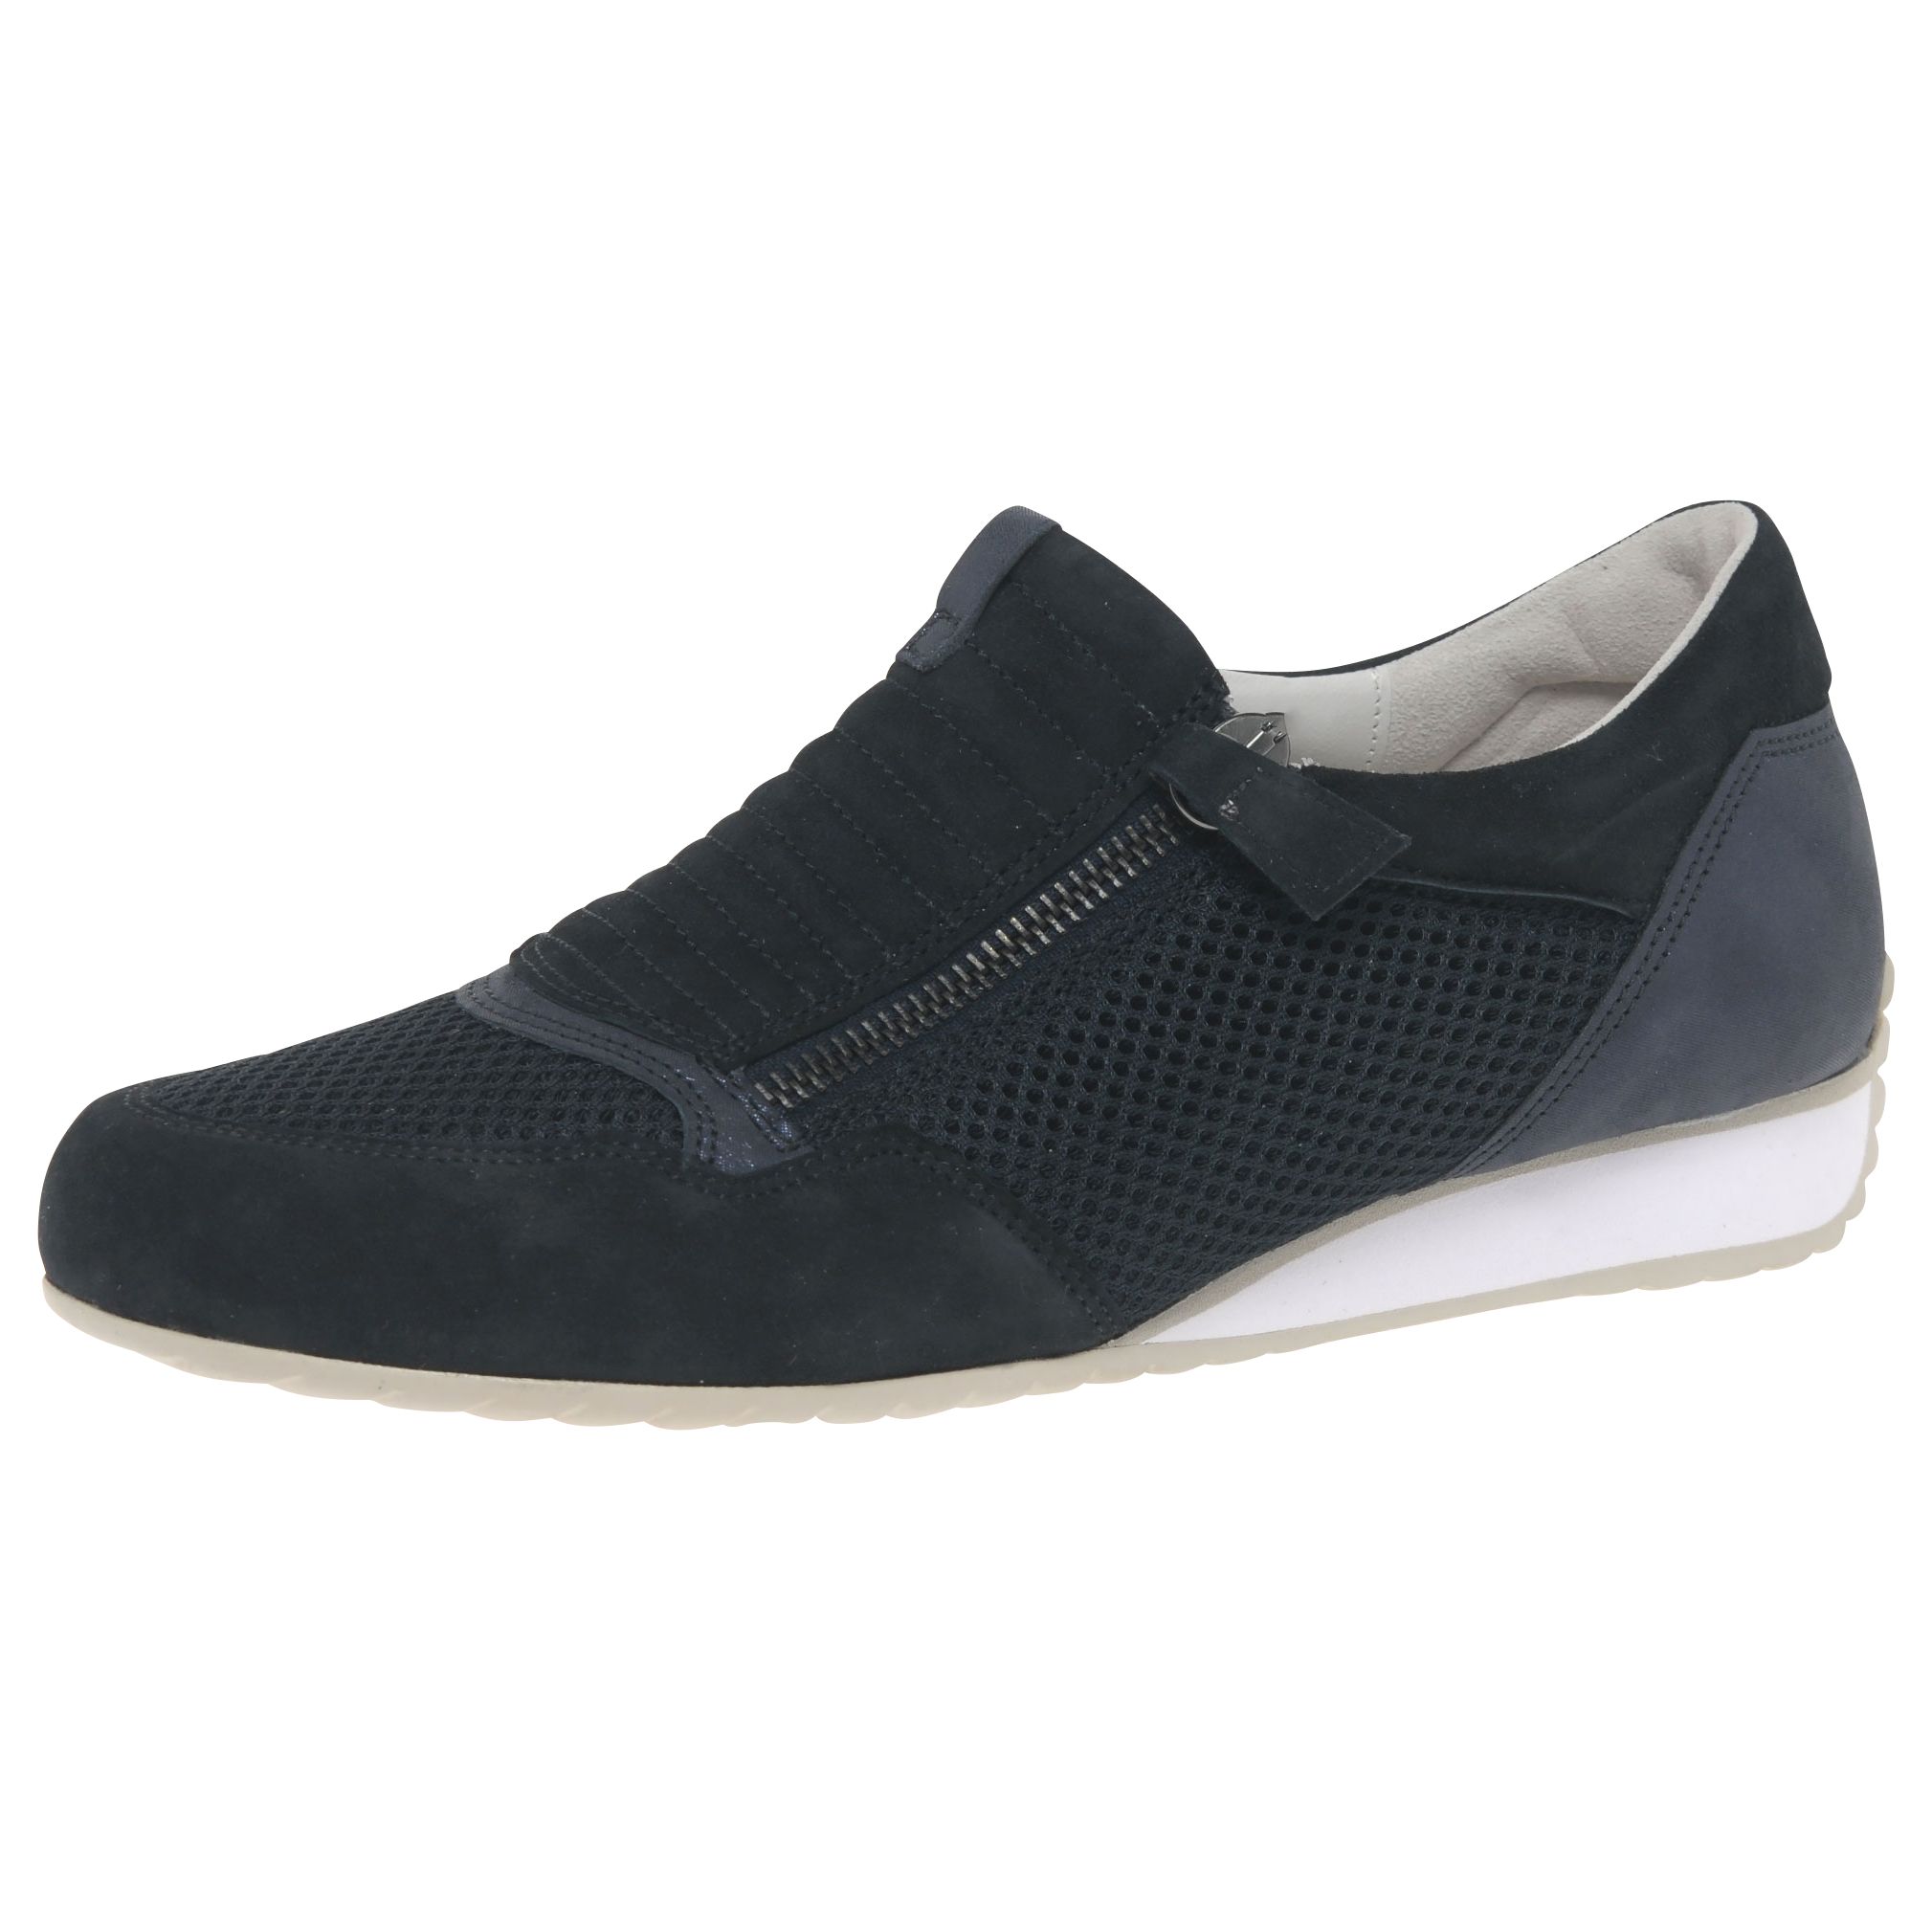 Gabor Brunello Wide Fit Zip Trainers at John Lewis & Partners